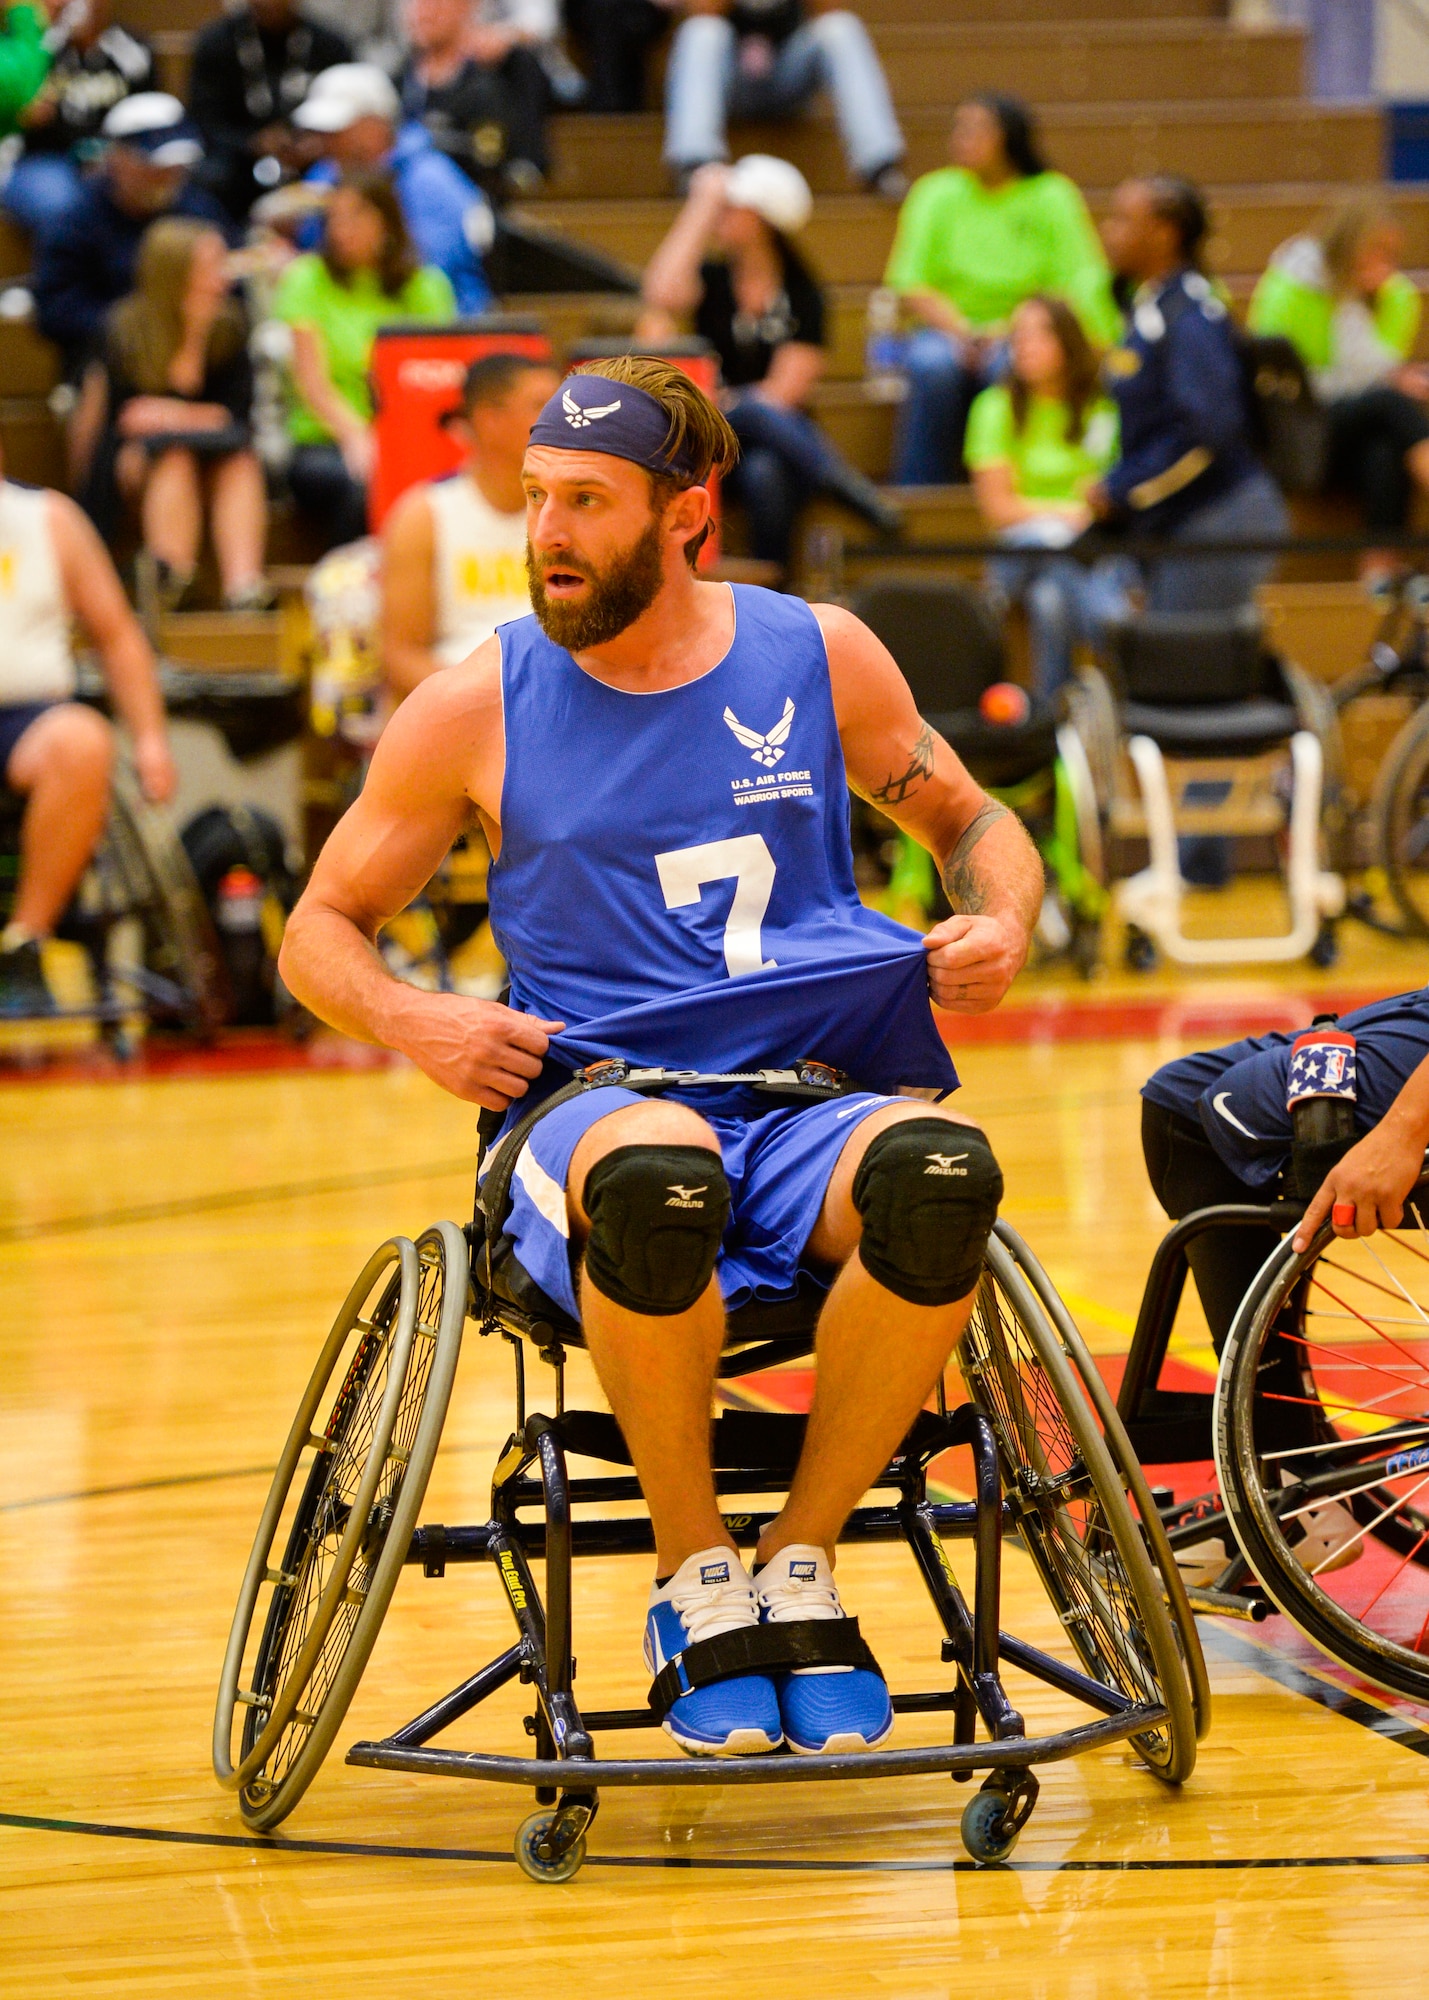 Retired Senior Airman Ryan Gallo adjusts his uniform after being knocked down in a basketball game against the Navy at the 2014 Warrior Games on Sept. 29, 2014, at the United States Olympic Training Center in Colorado Springs, Colo. The Air Force team lost 38-19 and will play Special Operations in the next round. (U.S Air Force photo/Staff Sgt. Devon Suits) 